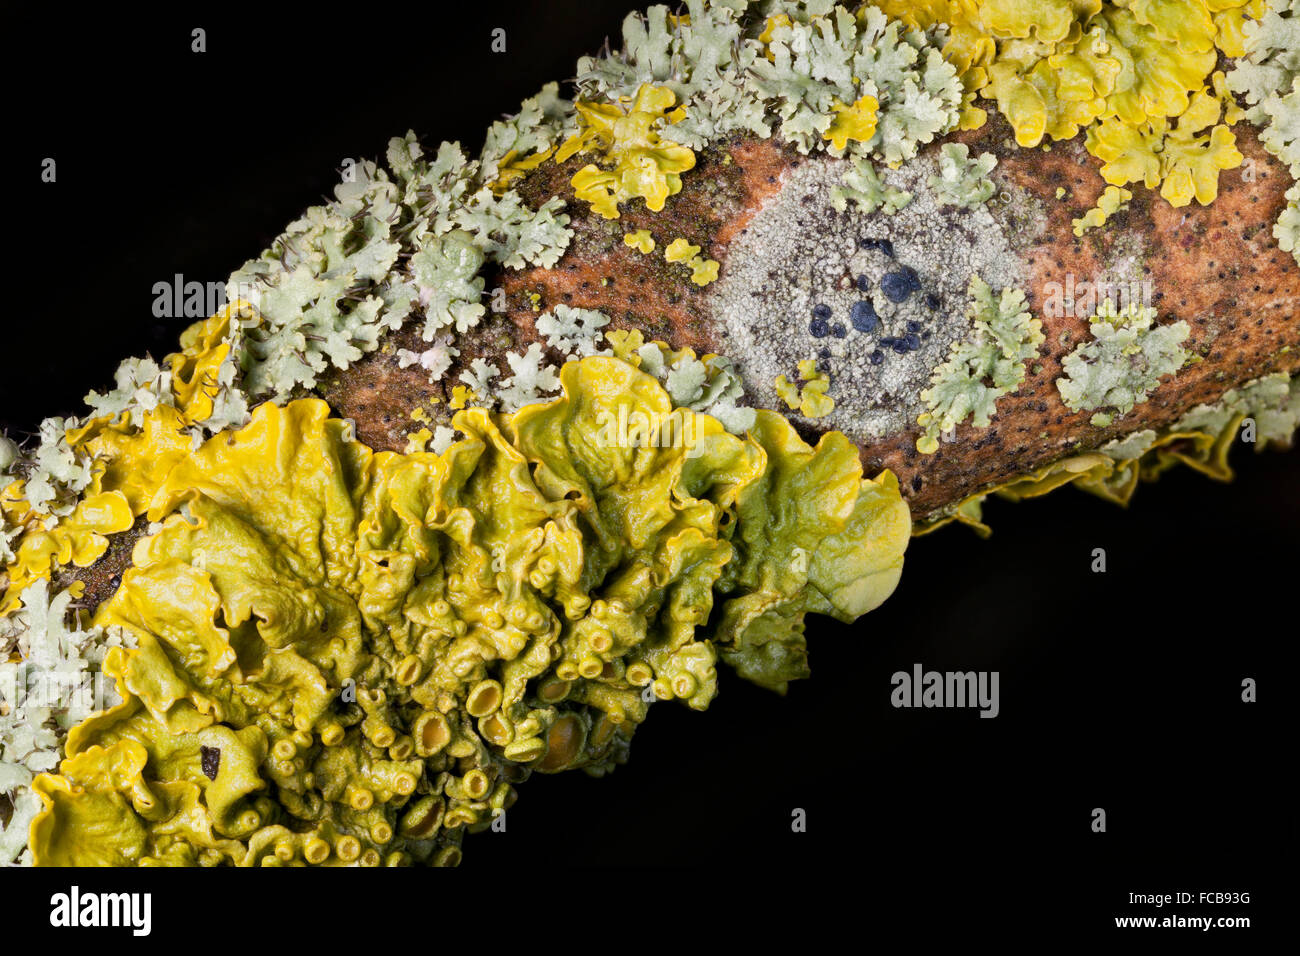 Lichen diversity, healthy mix of species growing on a tree branch Stock Photo